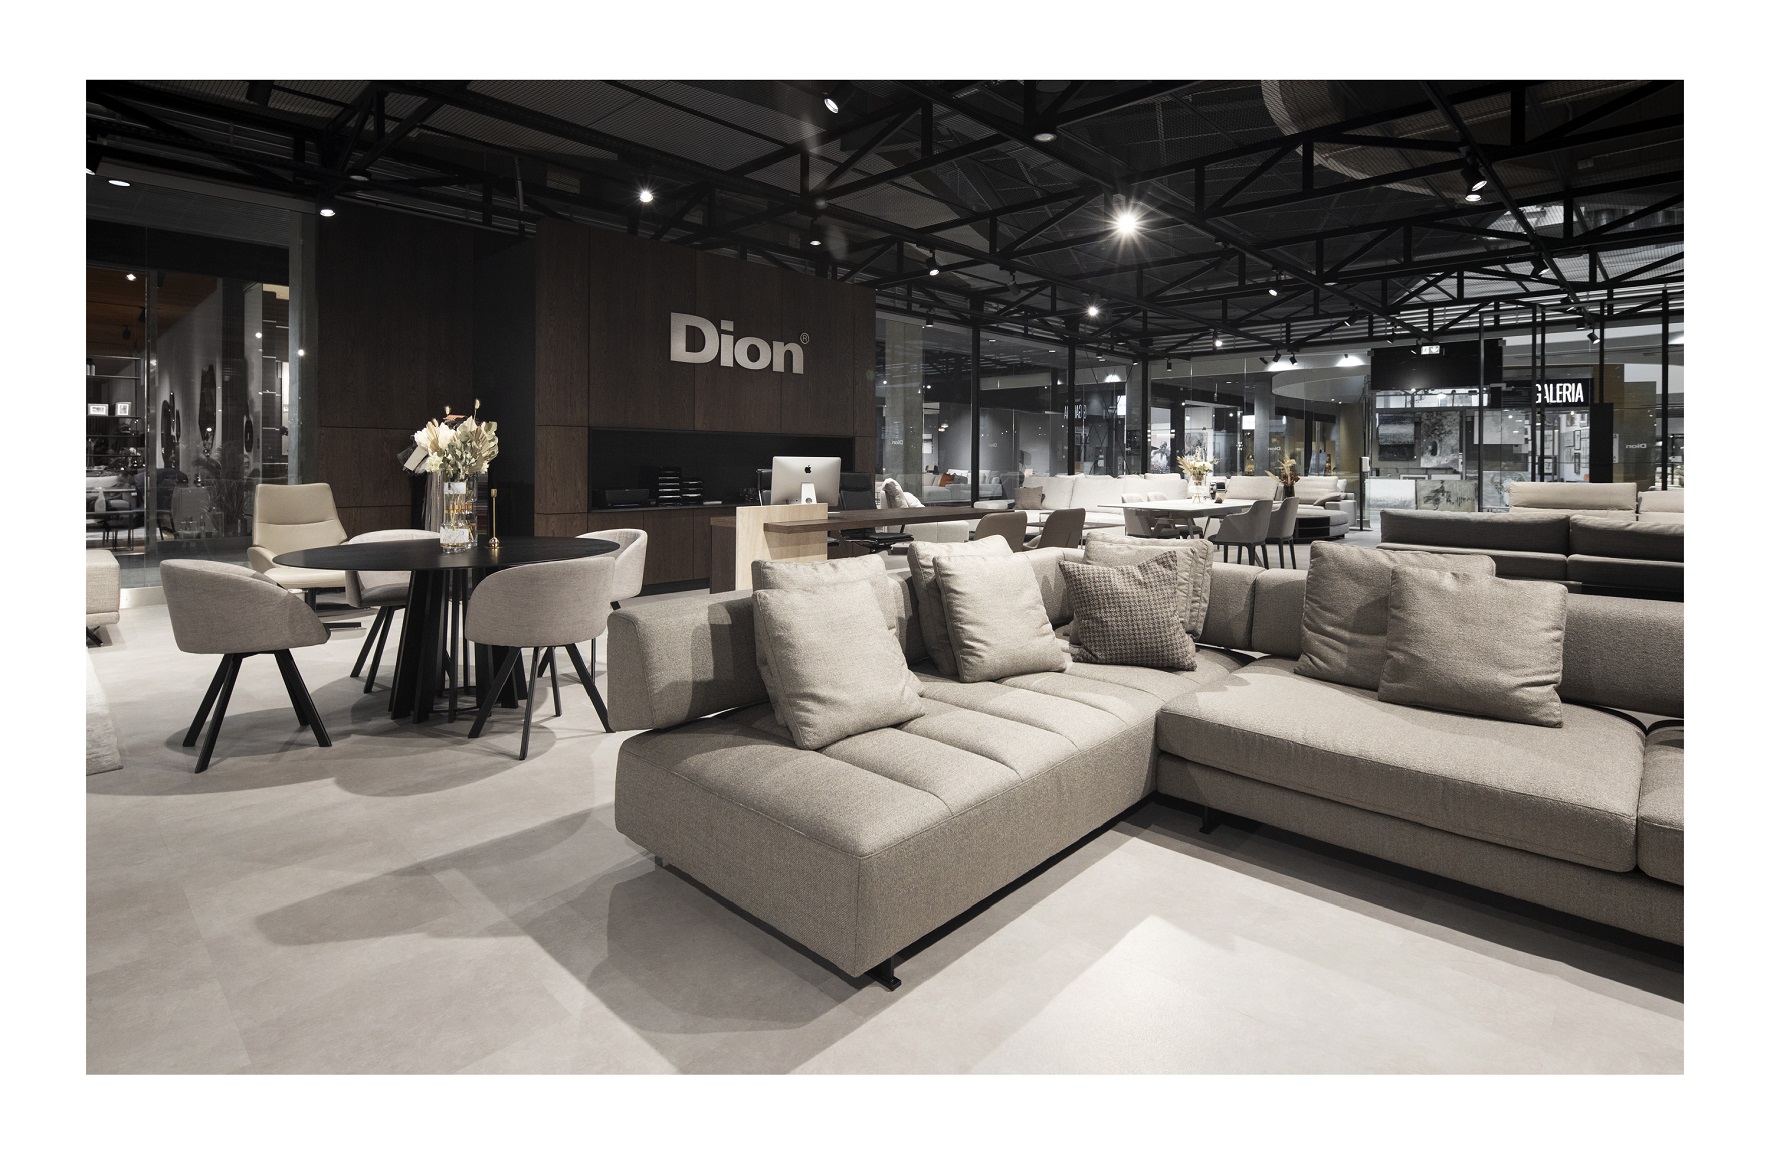 DION opens a showroom in Warsaw’s Domoteka